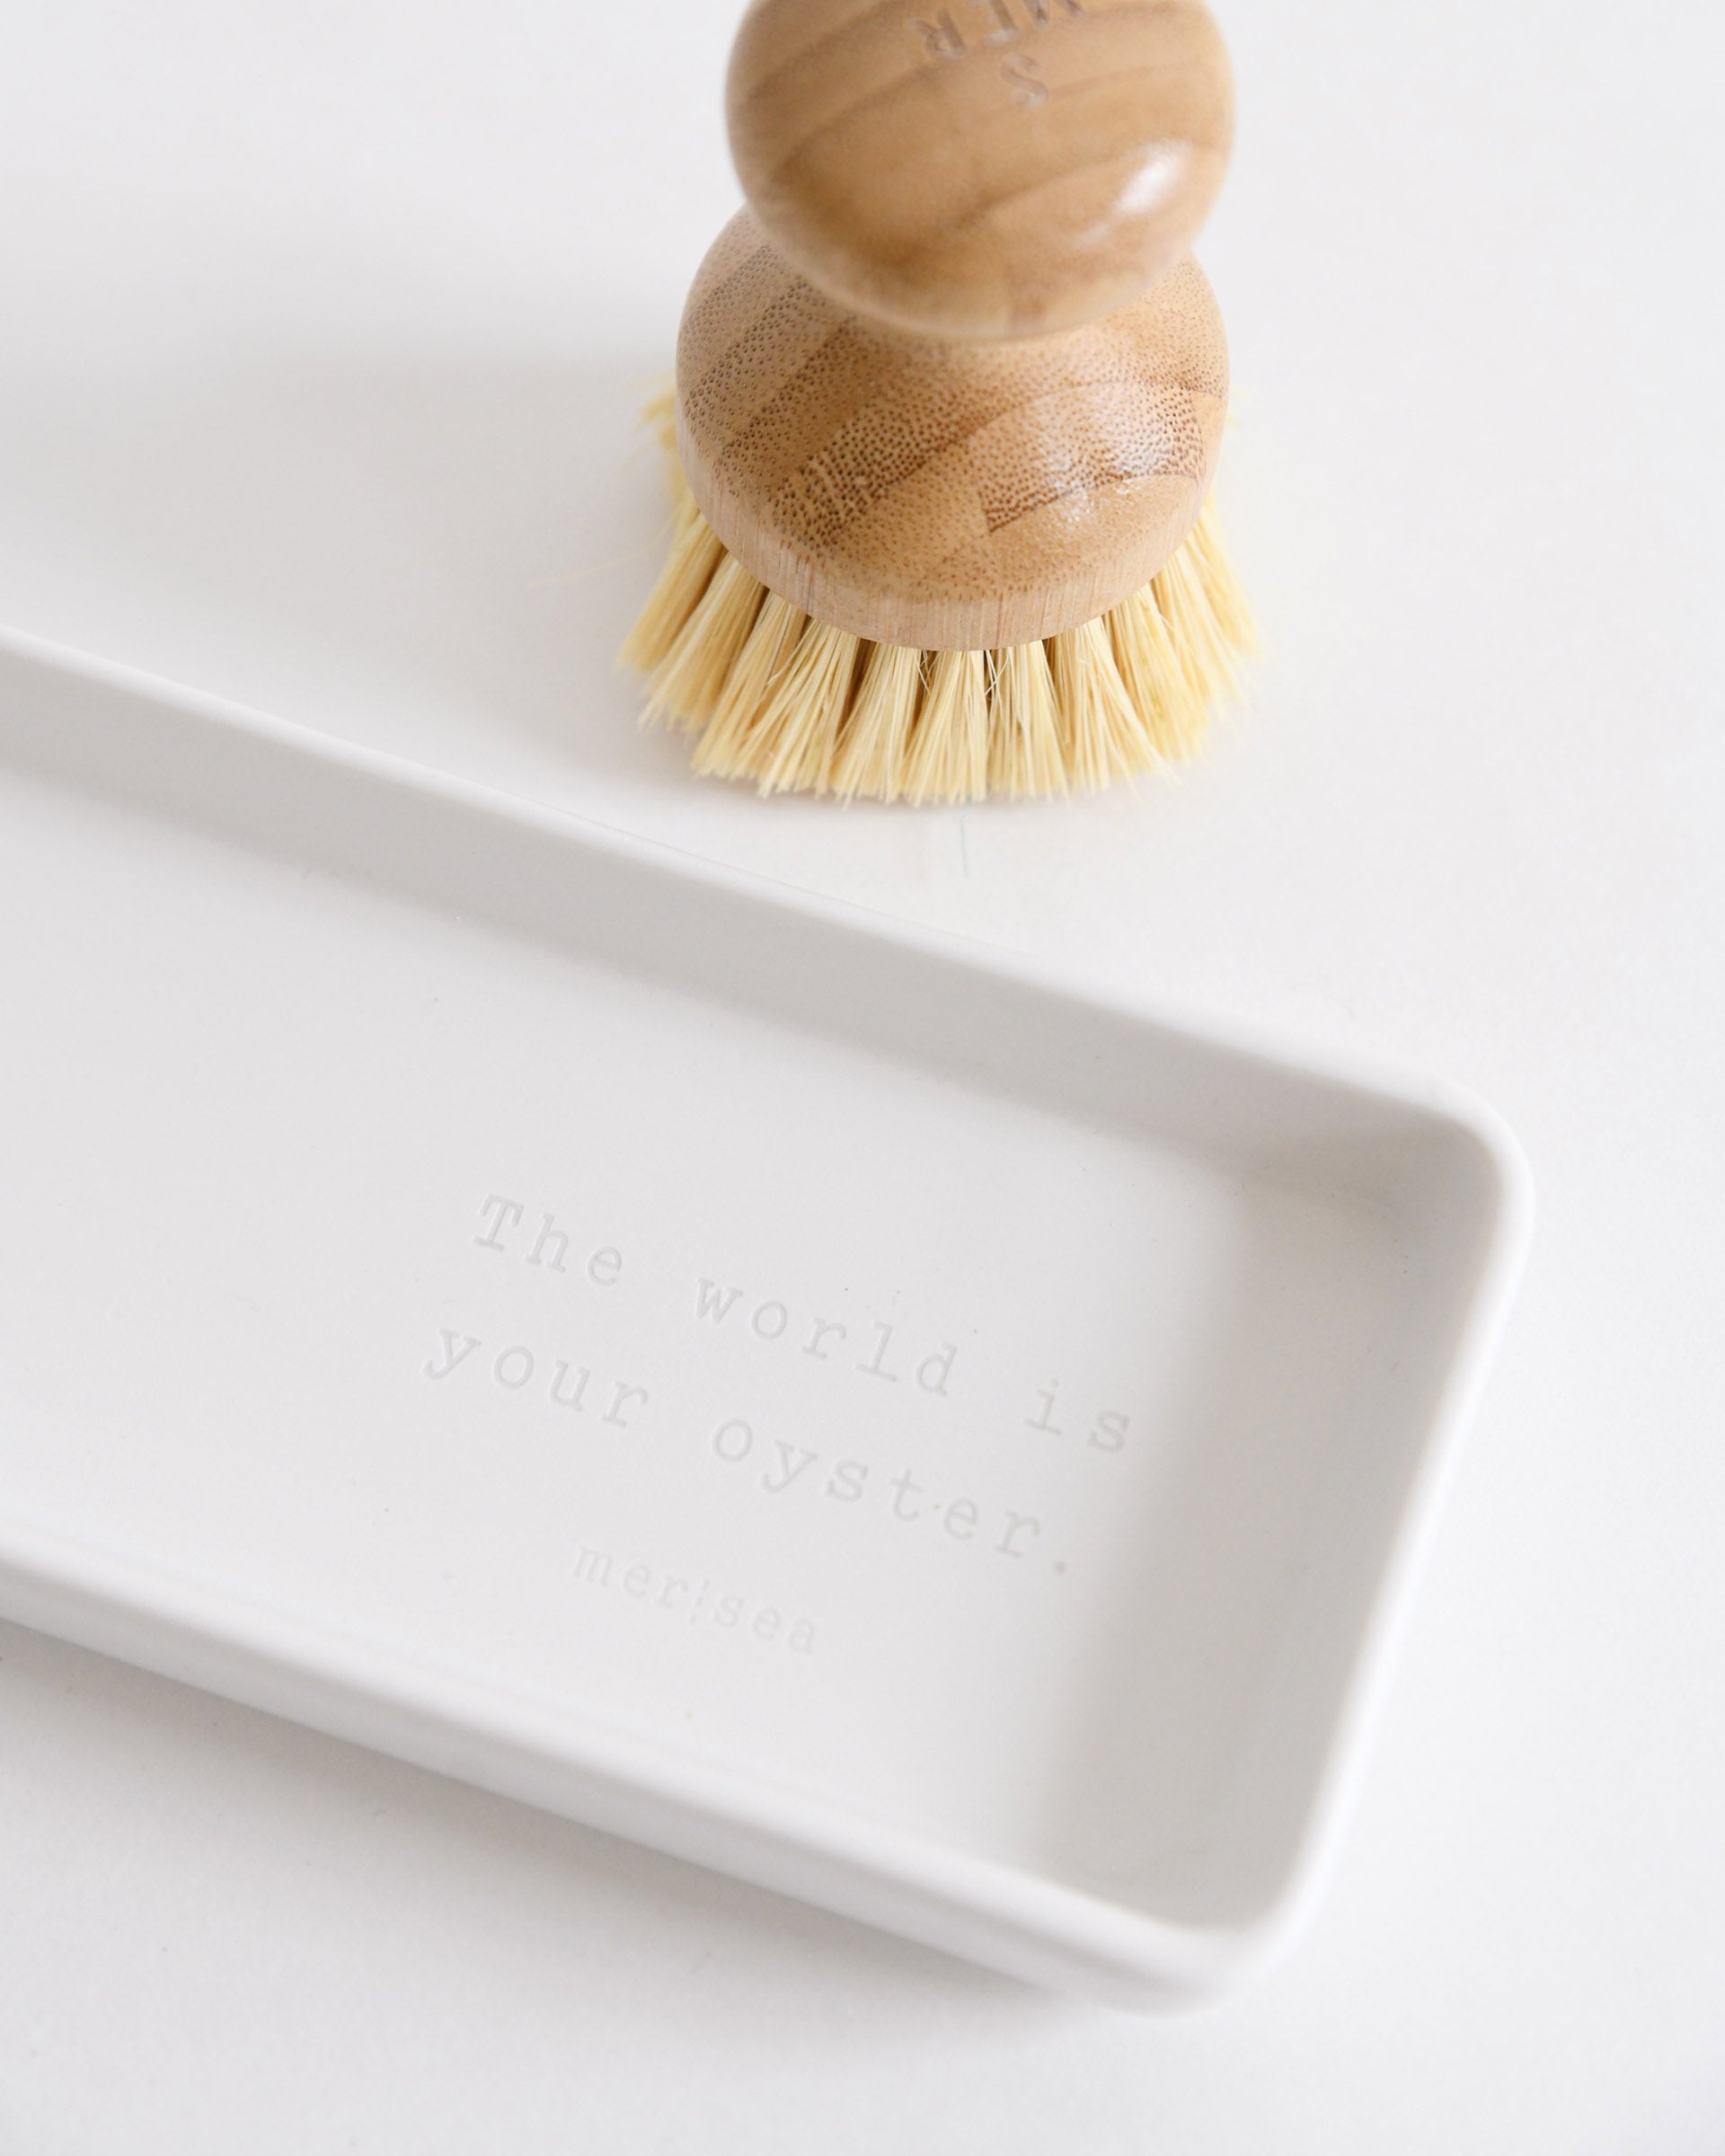 the world is your oyster dish and scrub brush